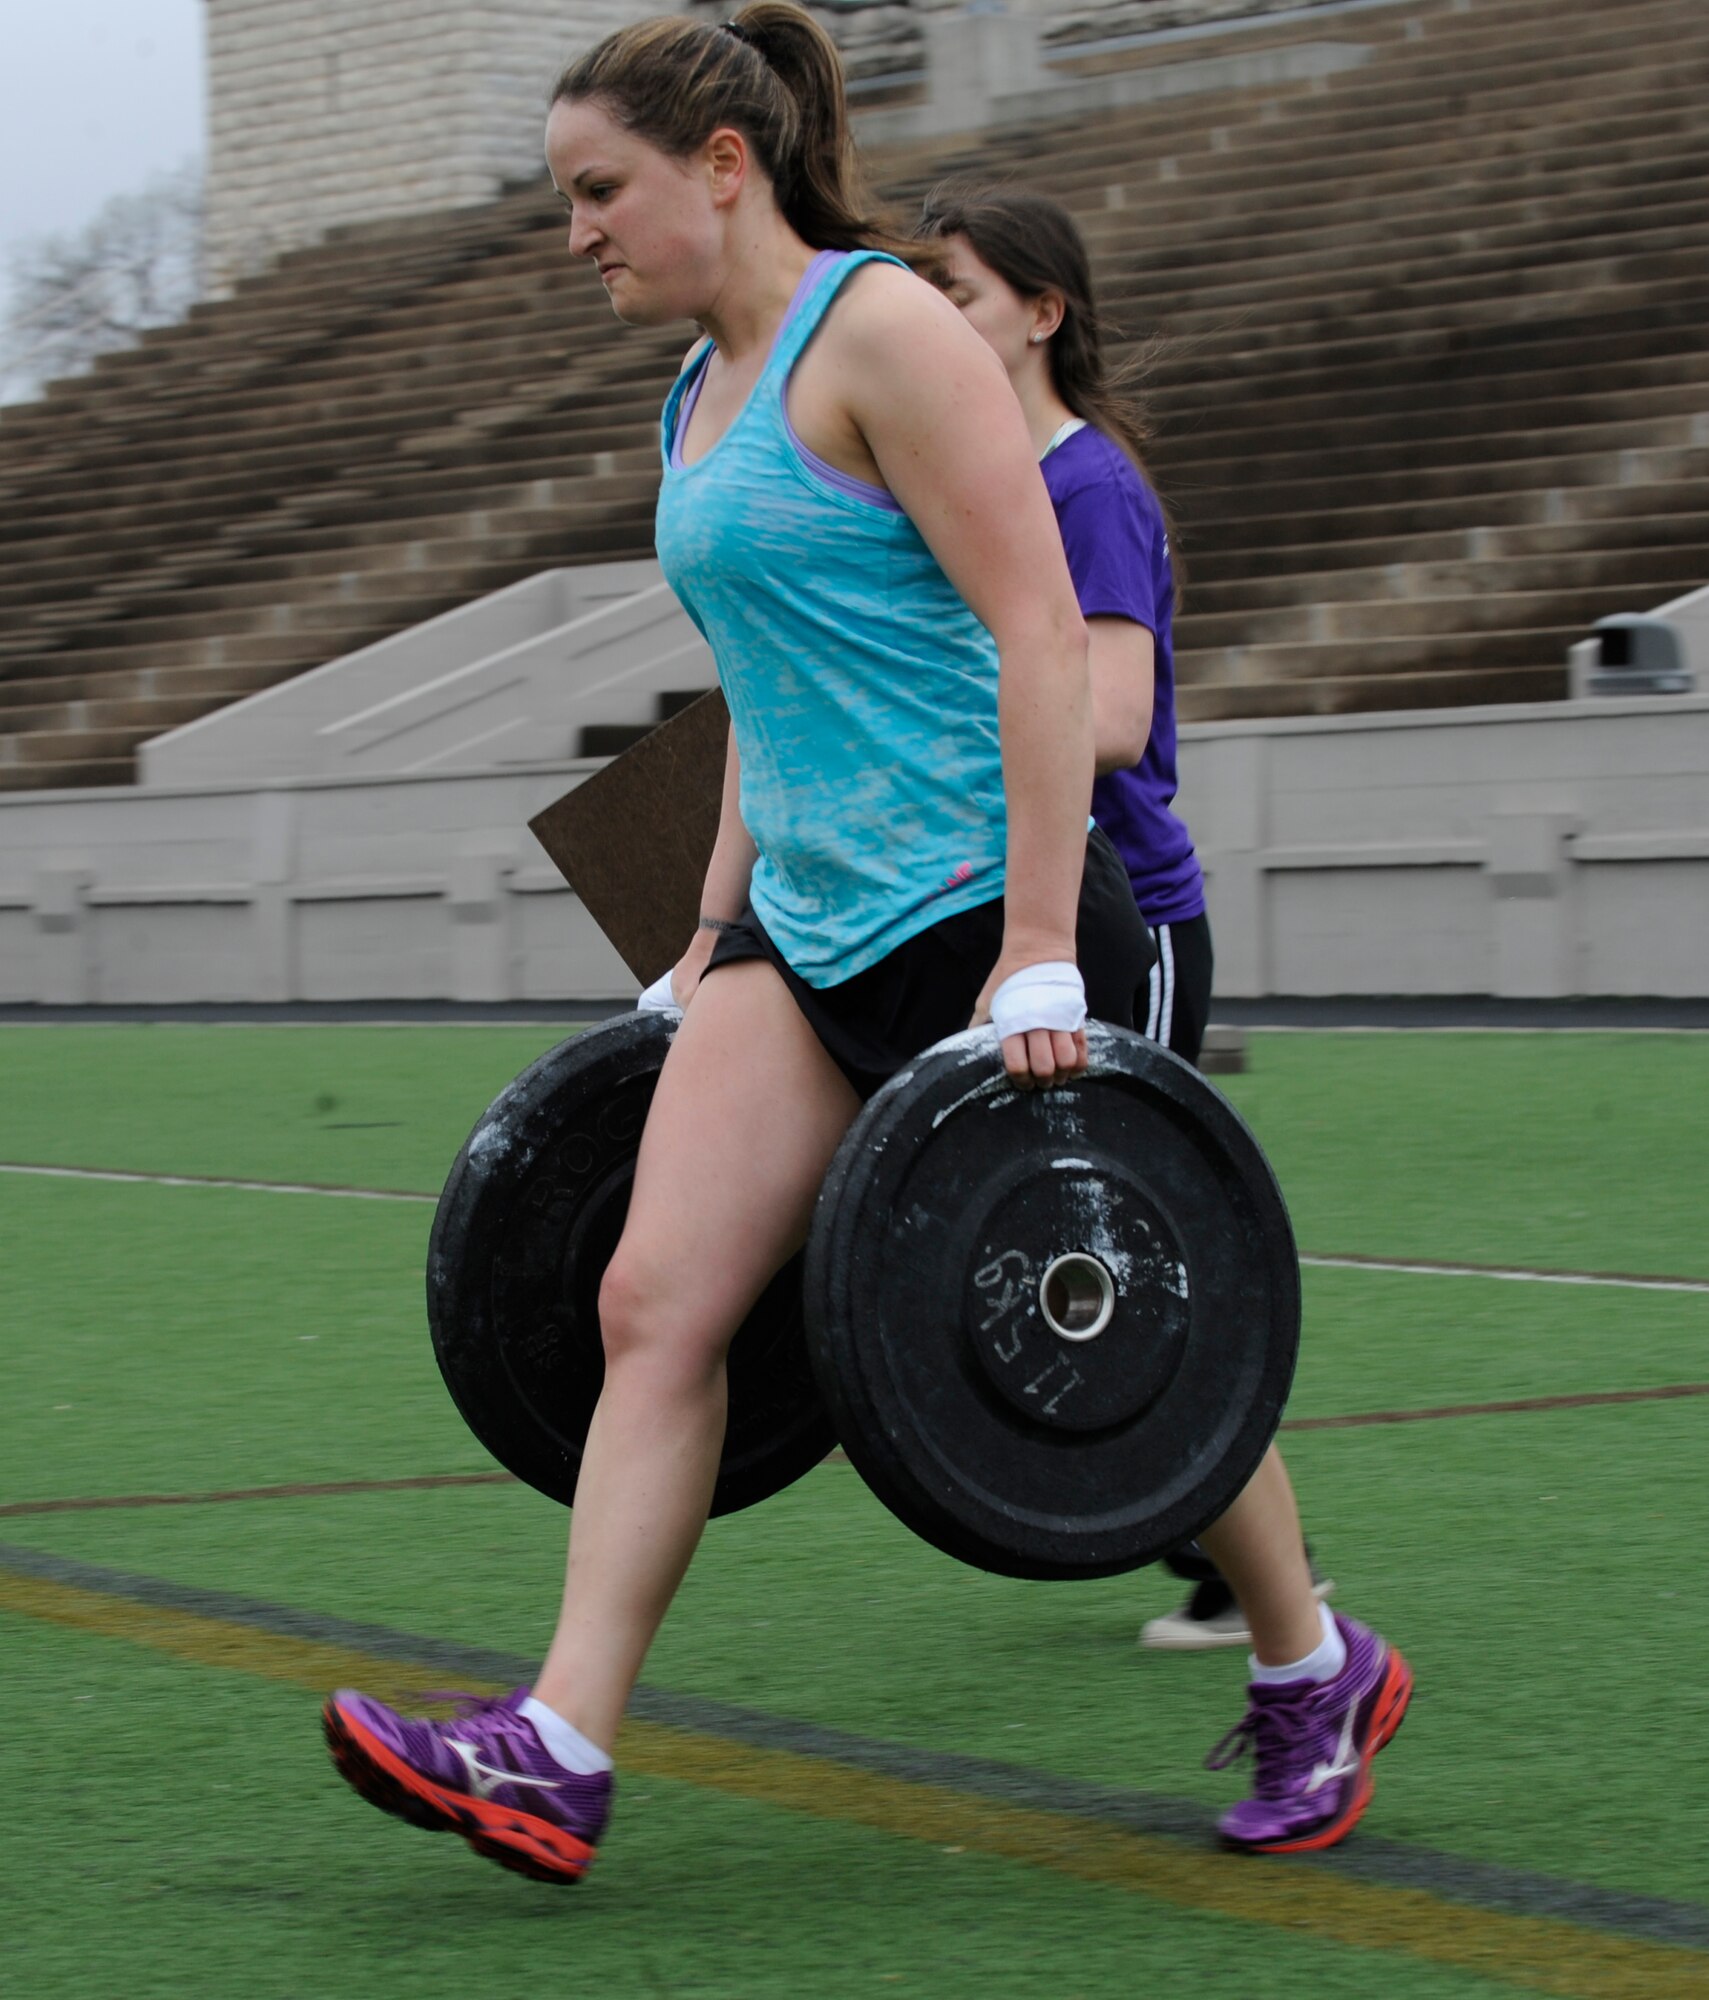 Staff Sgt. Samantha Scott, 509th Bomb Wing Command Post training manager, race with 25-pound plates across a football field during the K-State CrossFit Challenge in Manhattan, Kan., April 27, 2013.  After dropping the weights, the participants ran the bleachers eight times, doing burpees between each set. (U.S. Air Force photo by Staff Sgt. Alexandra M. Boutte/Released)